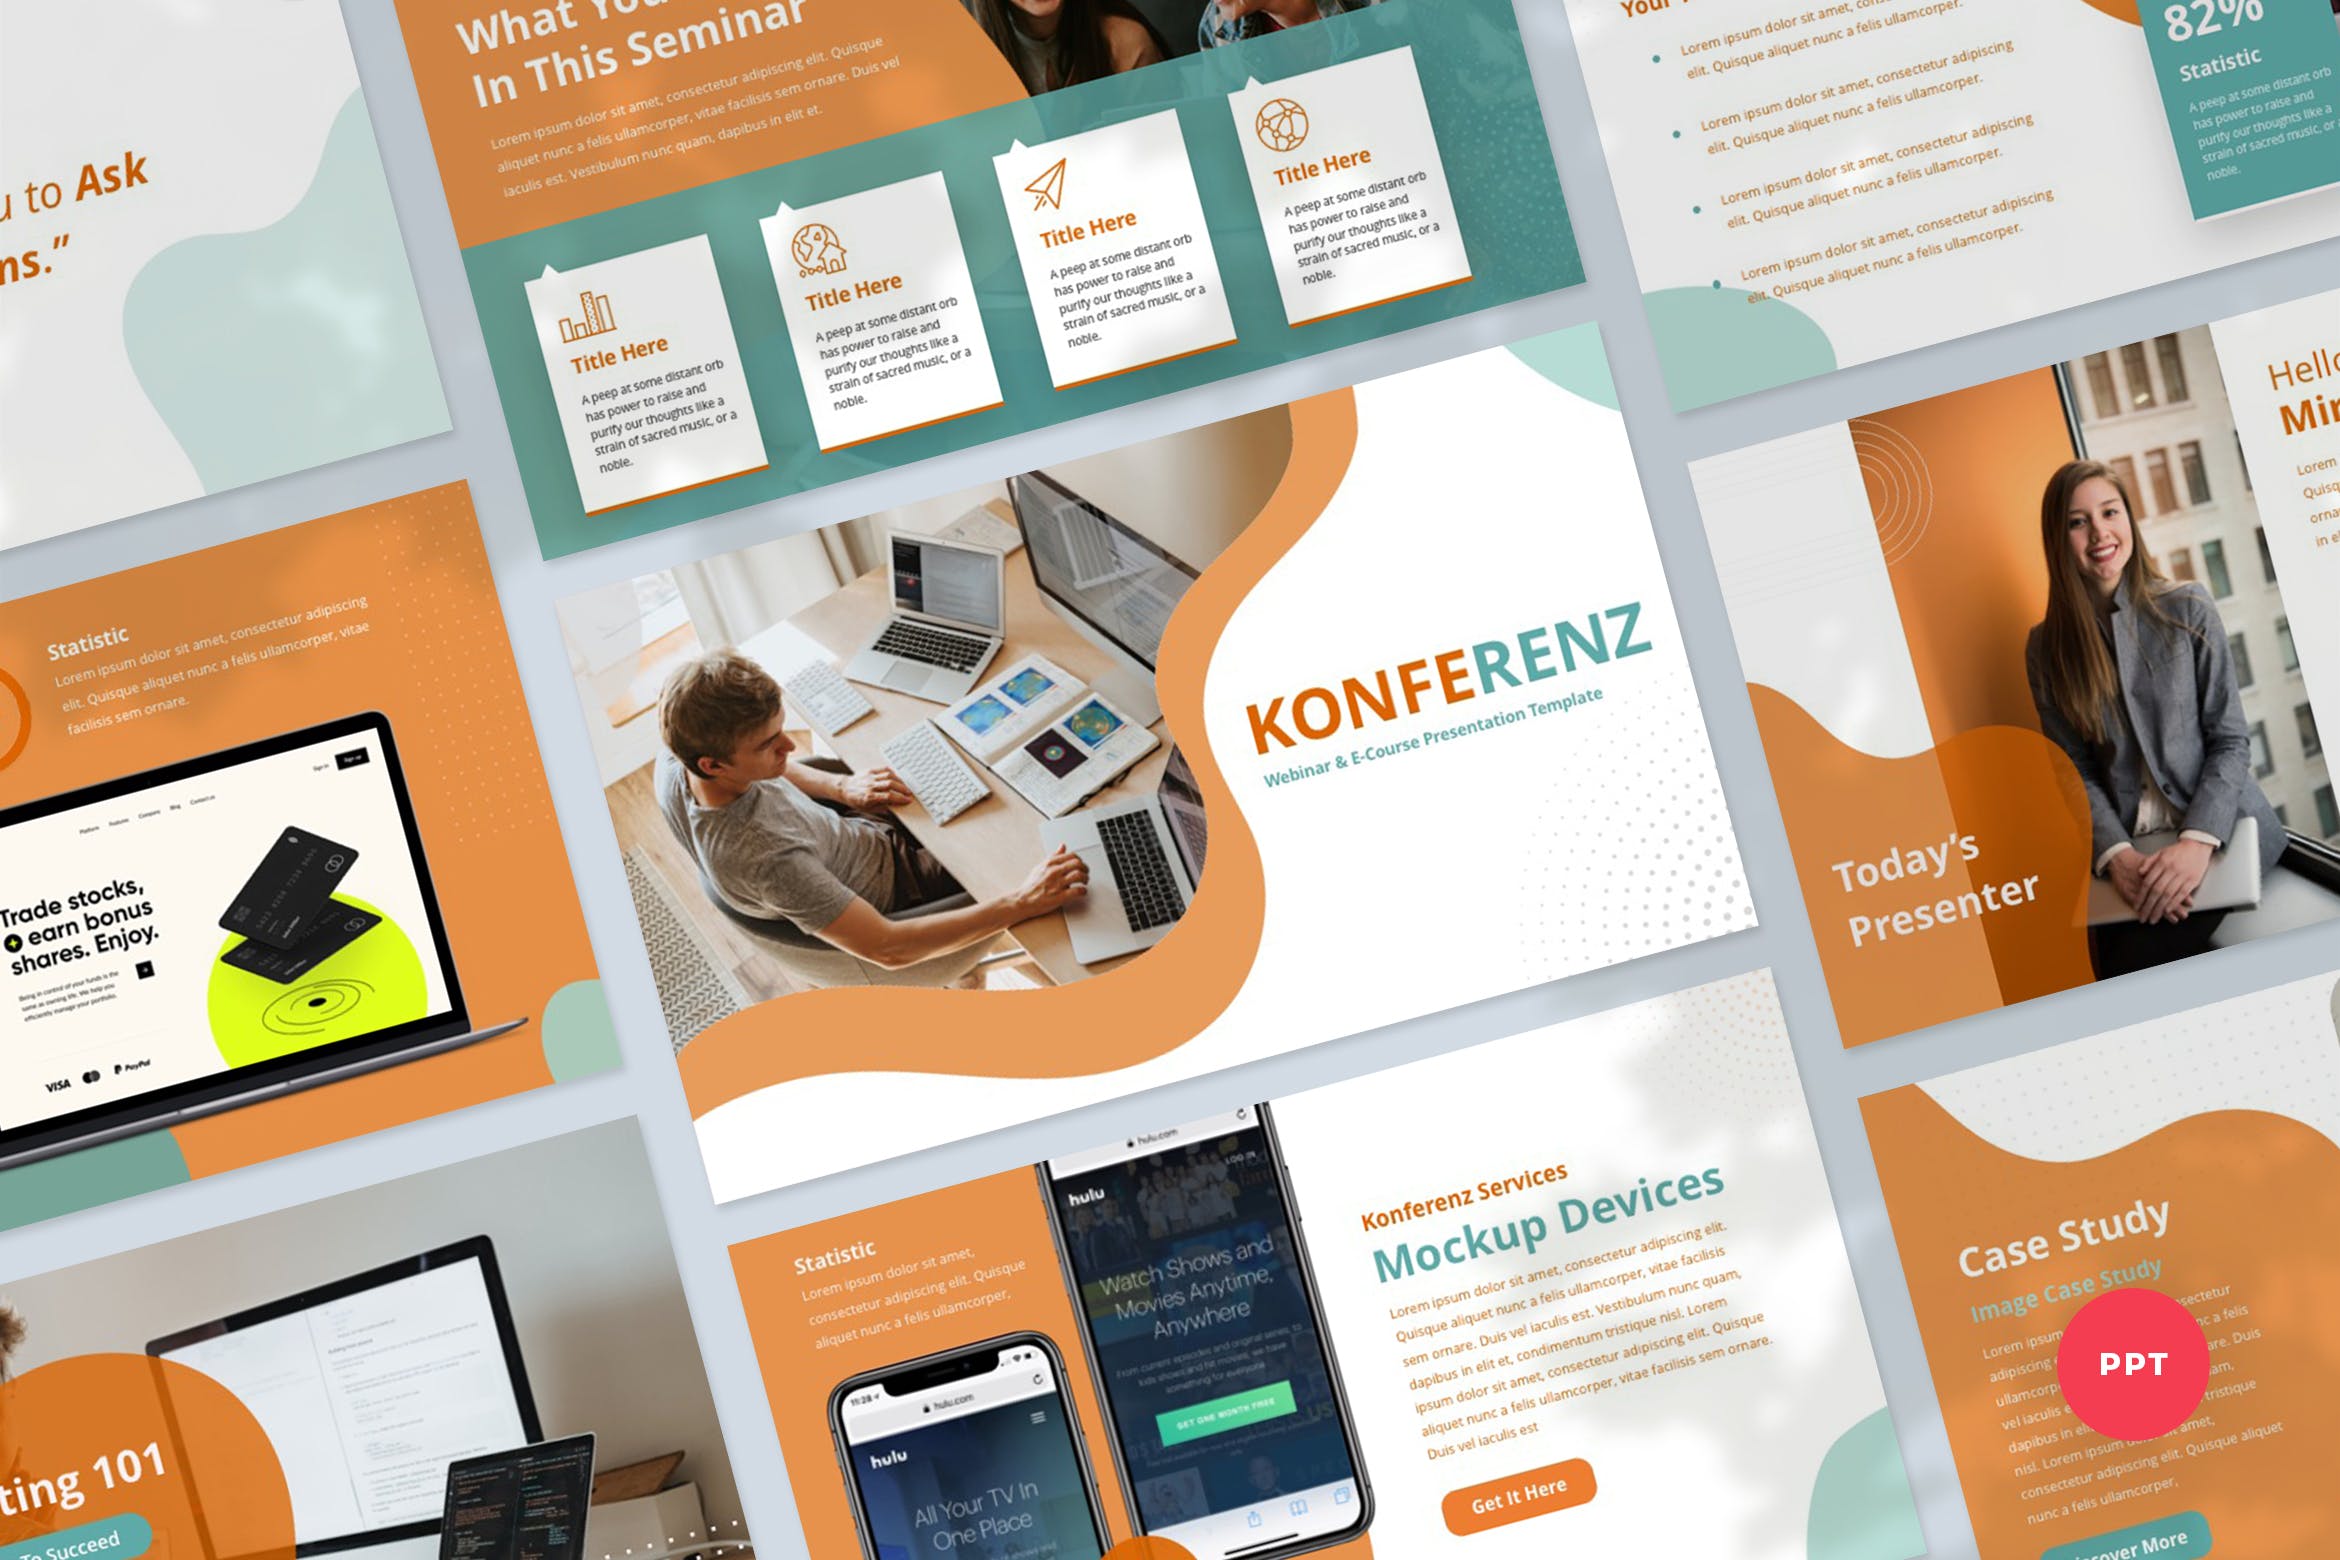 Cover image of Webinar & Ecourse Presentation PowerPoint Template.